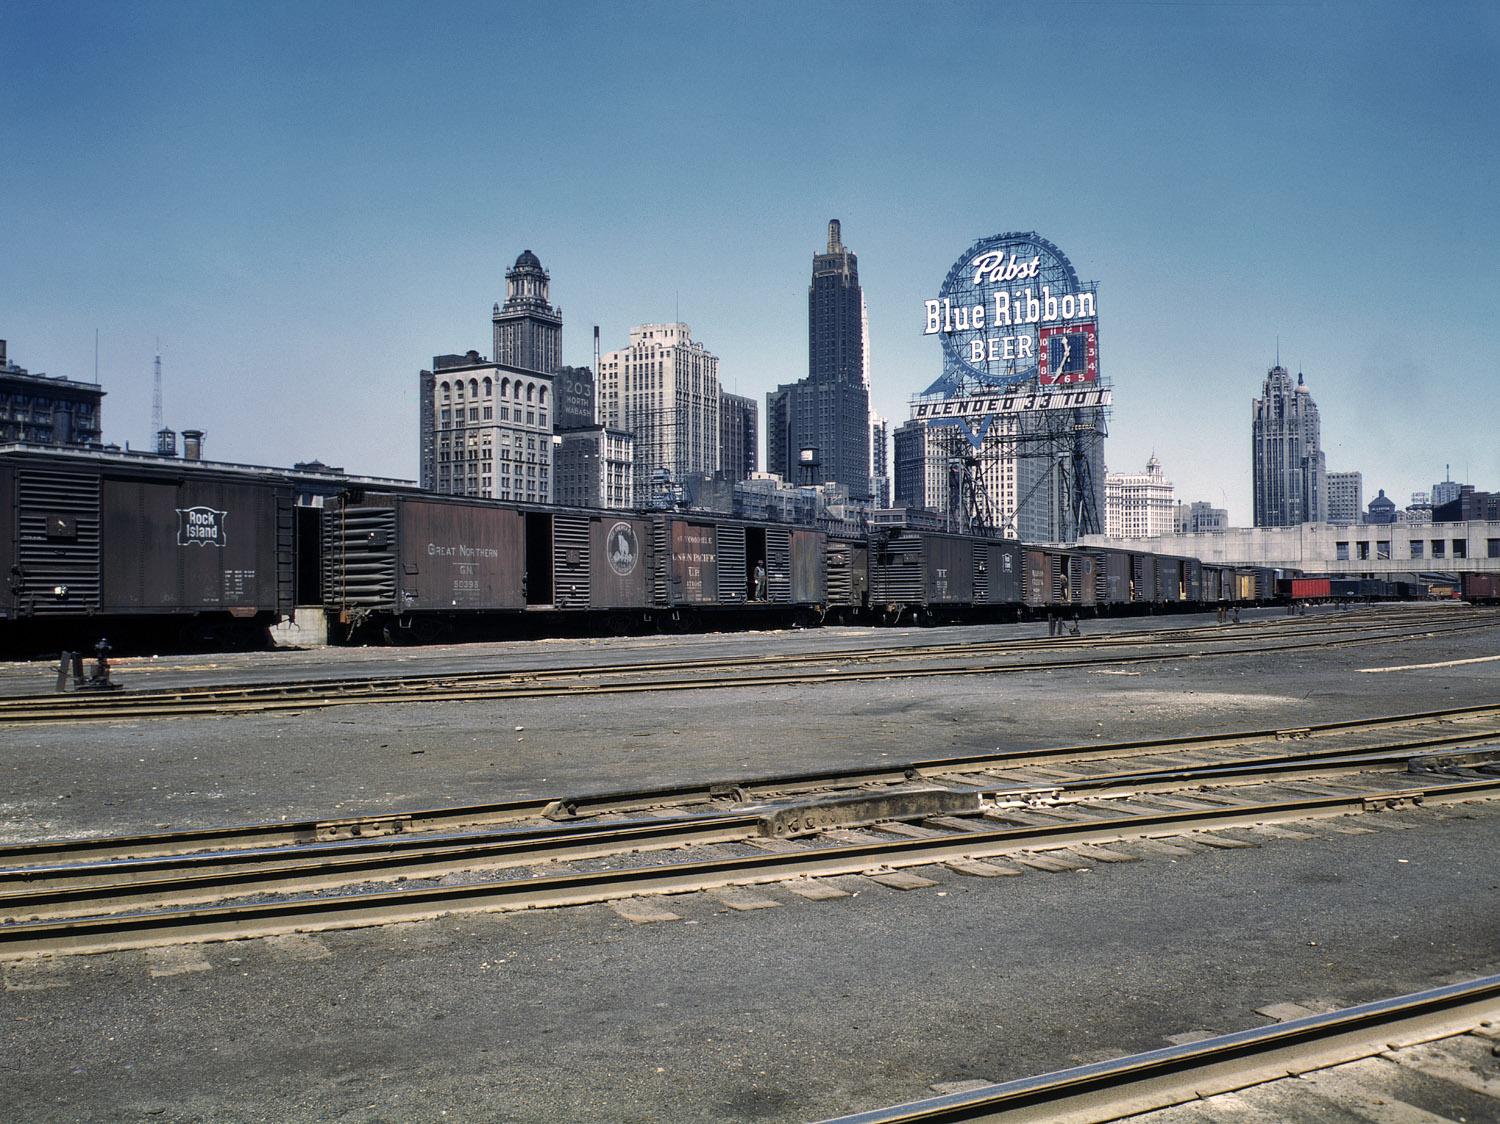 April 1943. South Water Street freight depot of the Illinois Central Railroad at Chicago. View full size. 4x5 Kodachrome transparency by Jack Delano.